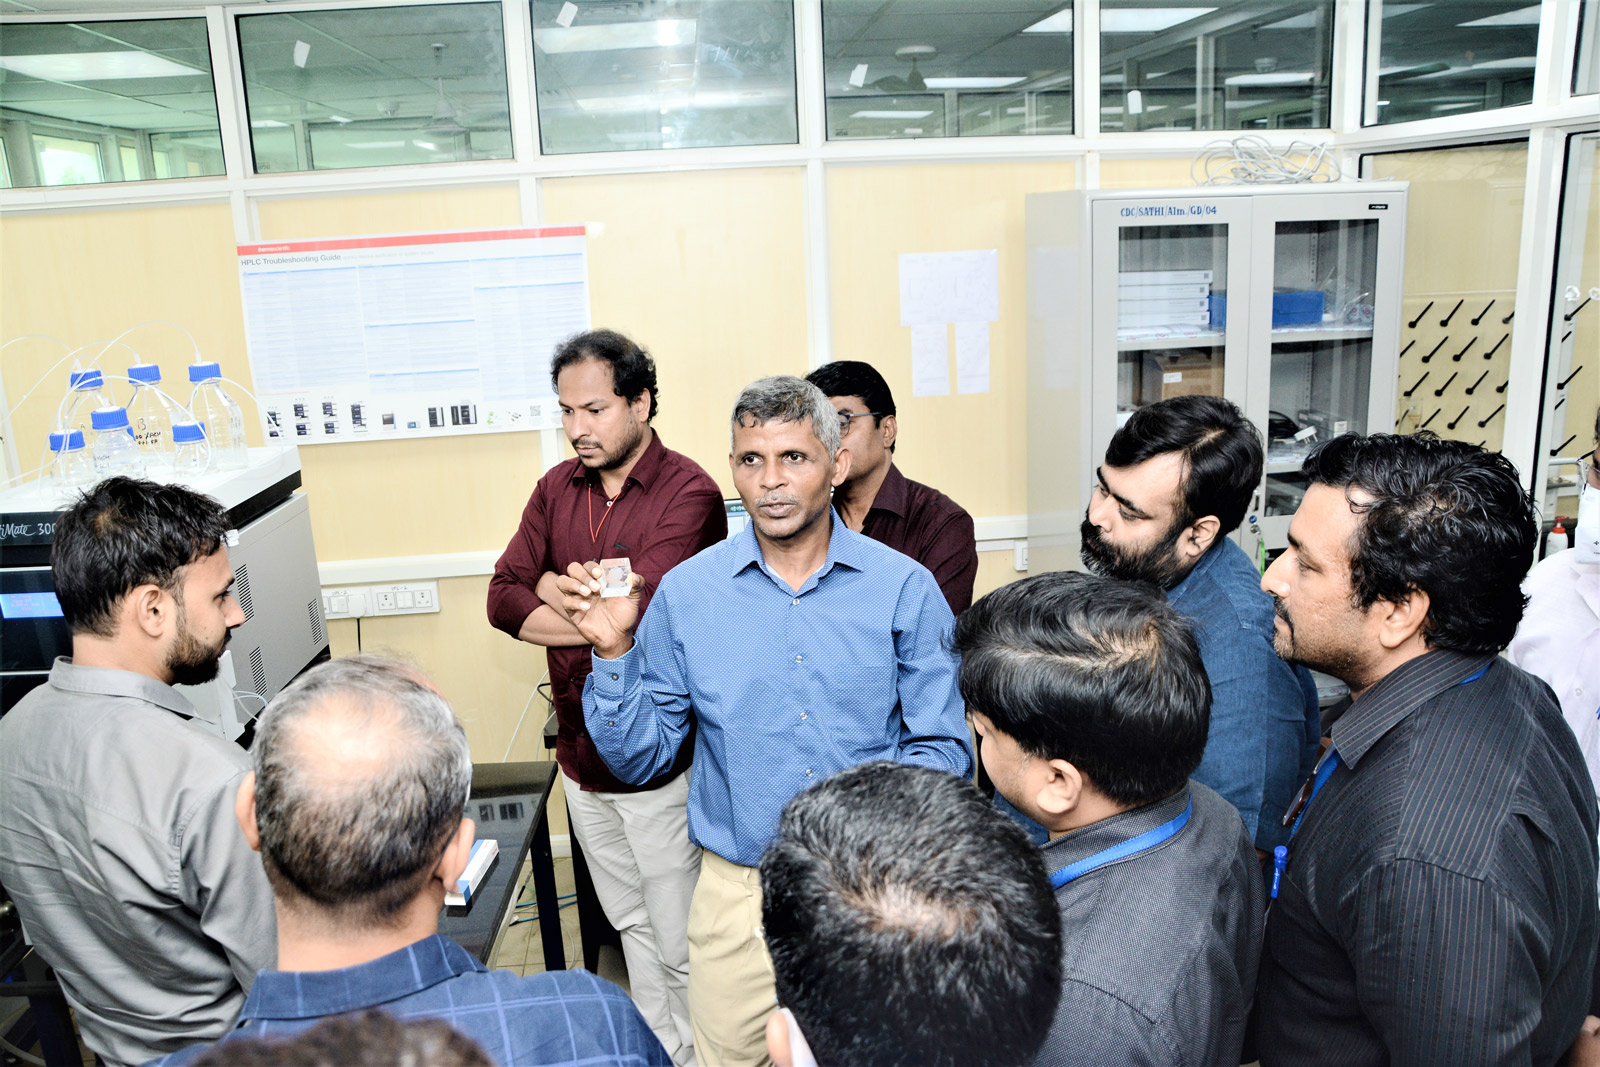  Hands-on Training Session taken by Dr. Rakesh Singh, HRAMS, Application Expert from Florida State Univ, USA